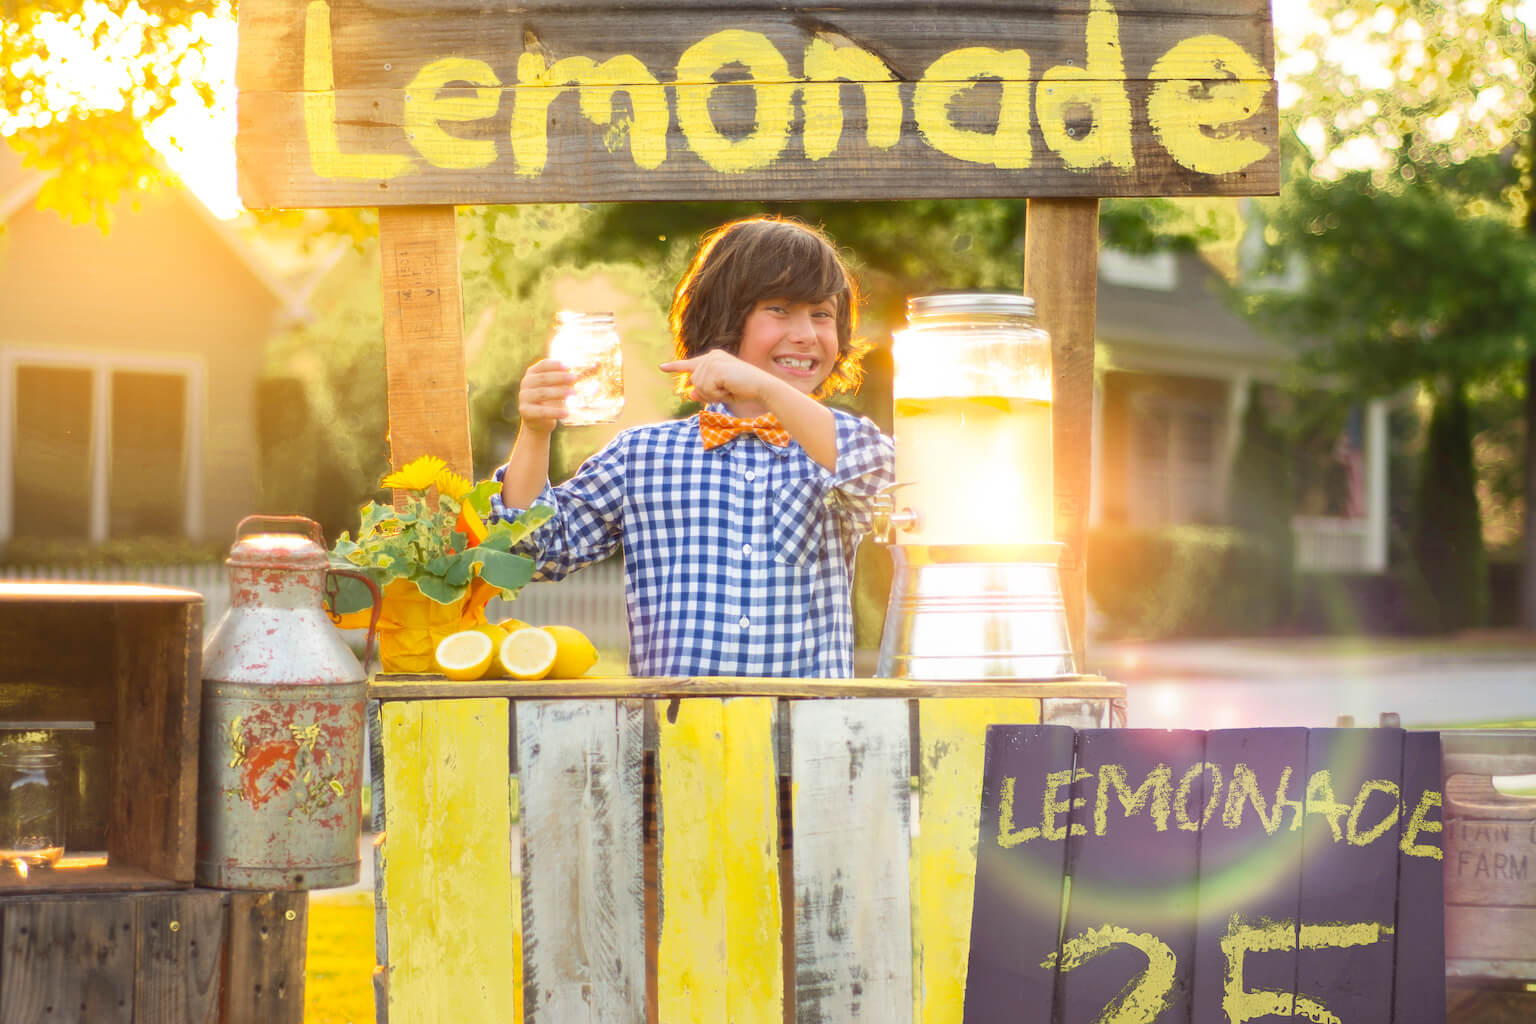 Stock photo: A boy in a blue-checkered shirt and orange bow tie stands behind his lemonade stand smiling as he points to the glass of lemonade he's holding up in his right hand. By Jim/stock.adobe.com. The photo represents Edison Juel's "Lemonade for Lahaina" lemonade stand.